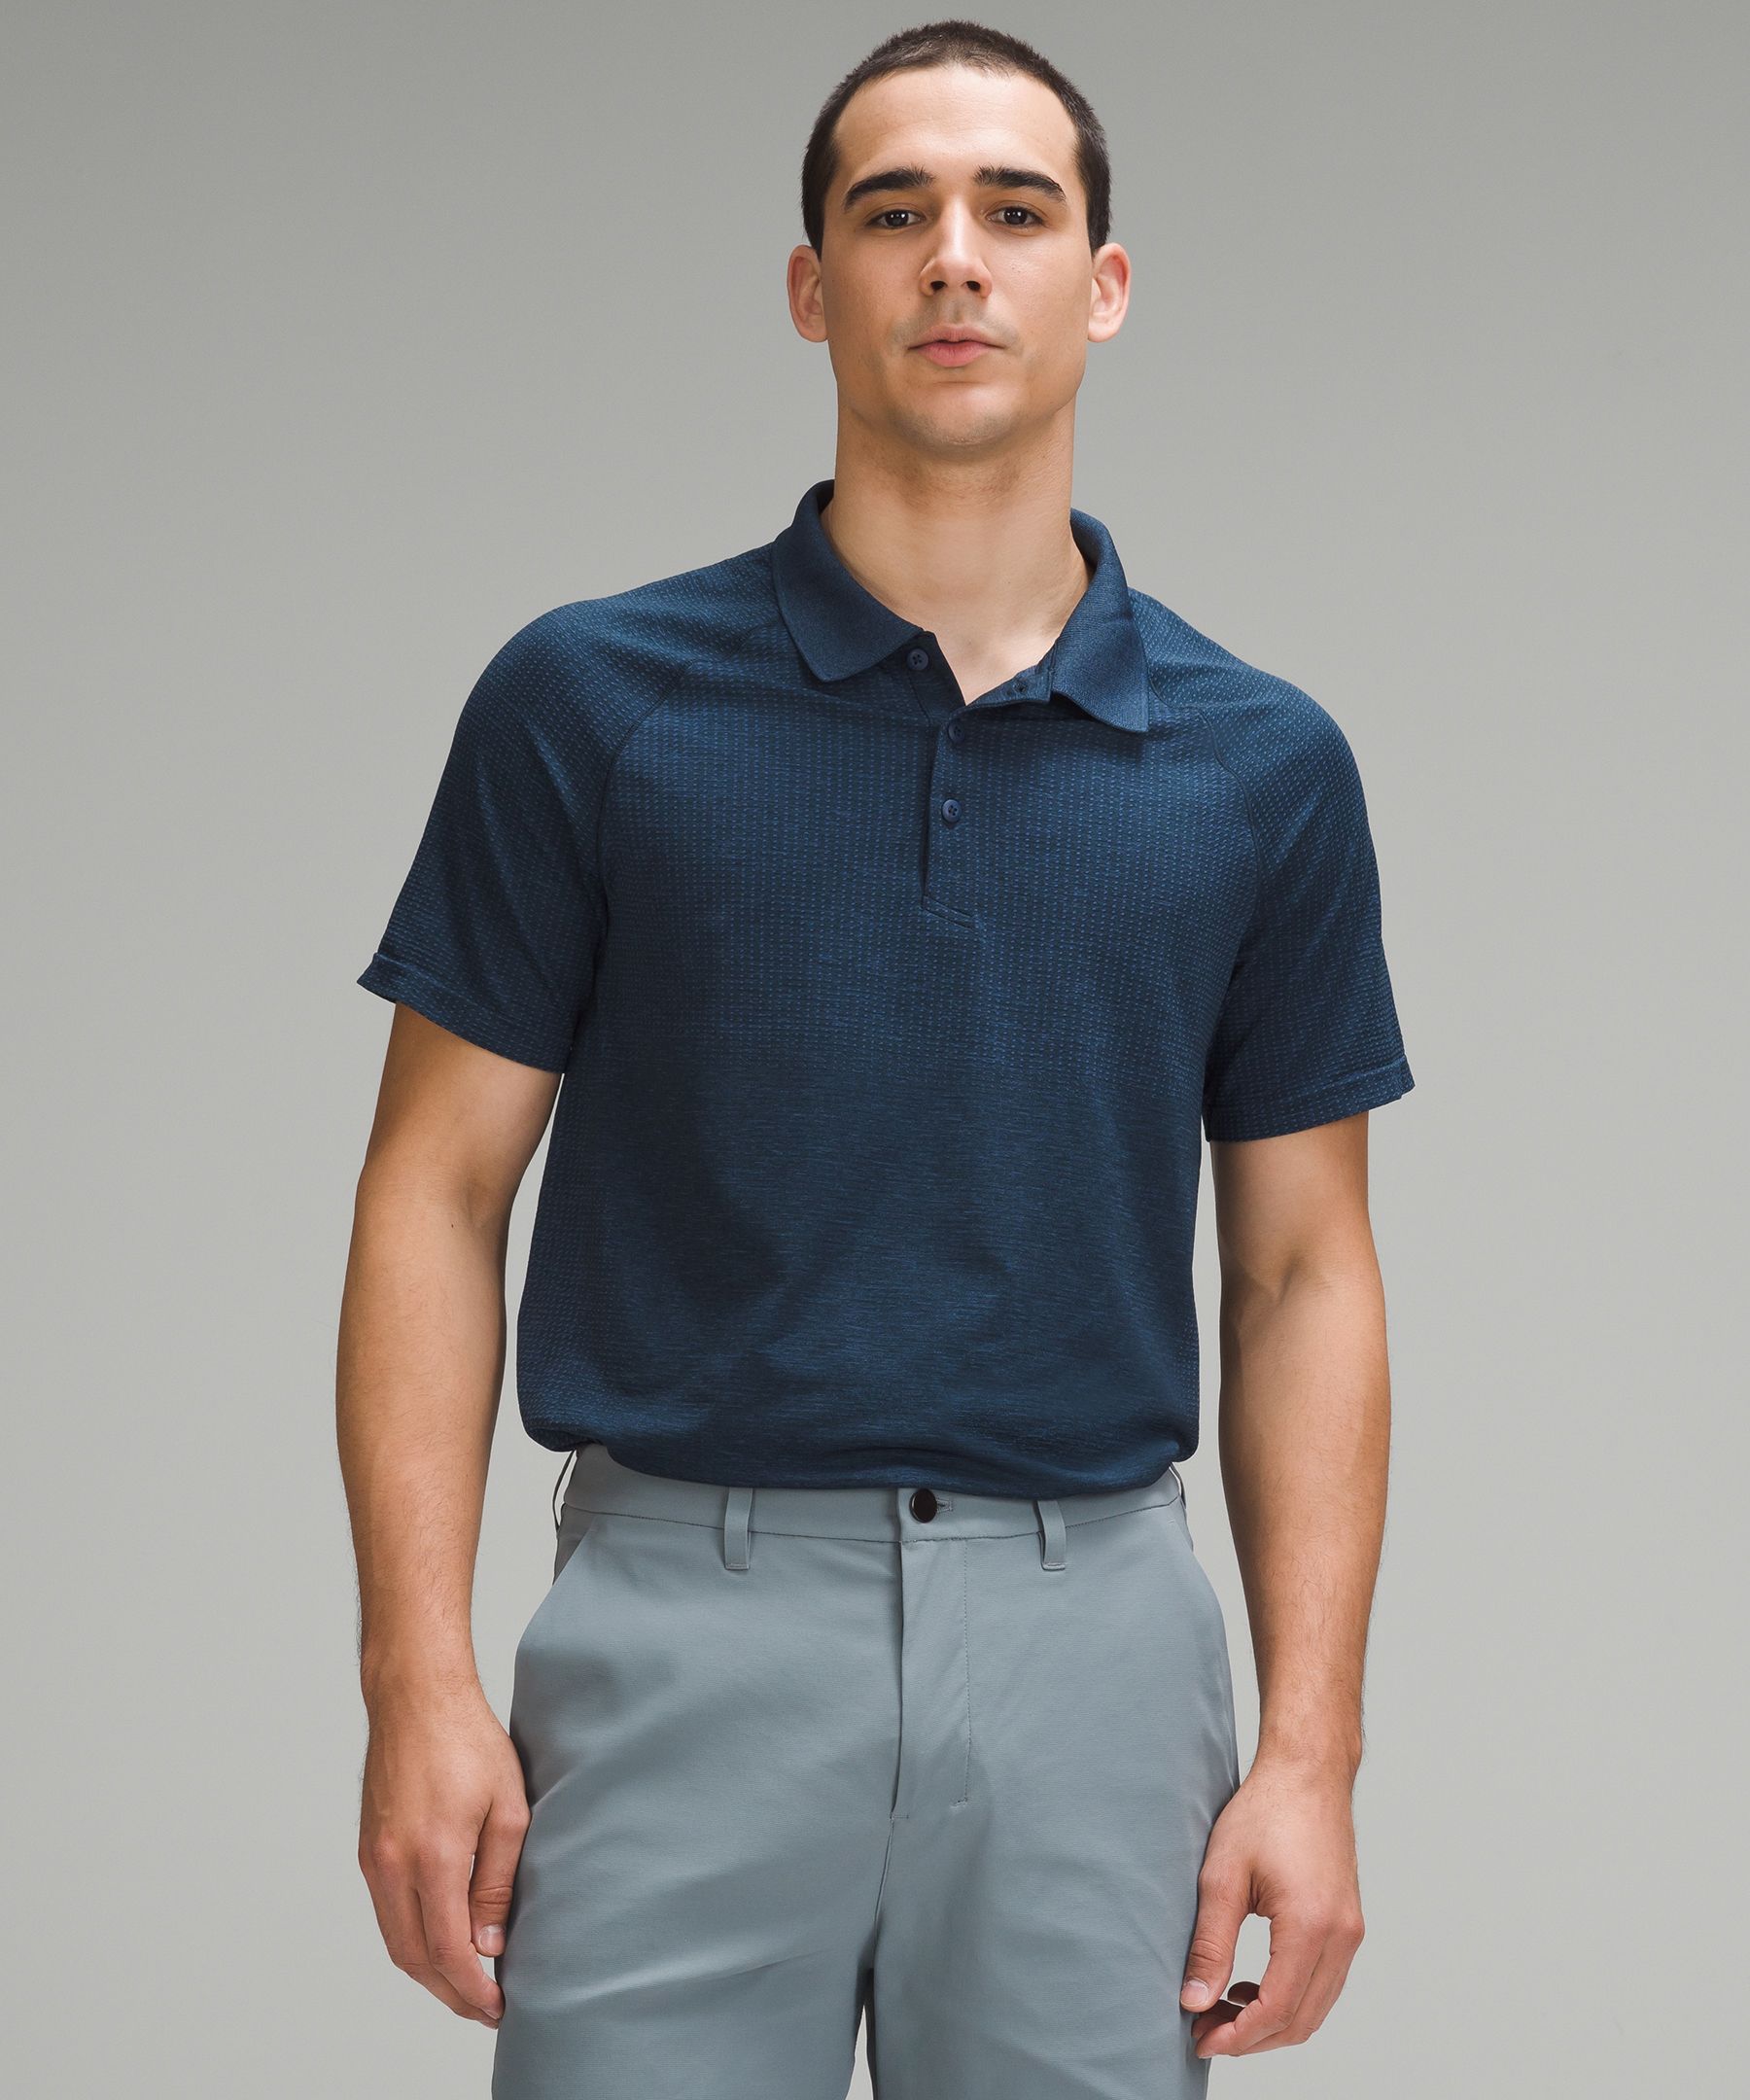 The New lululemon Golf Collection for Men 2023: Polo Shirts, Lightweight  Golf Shorts and More